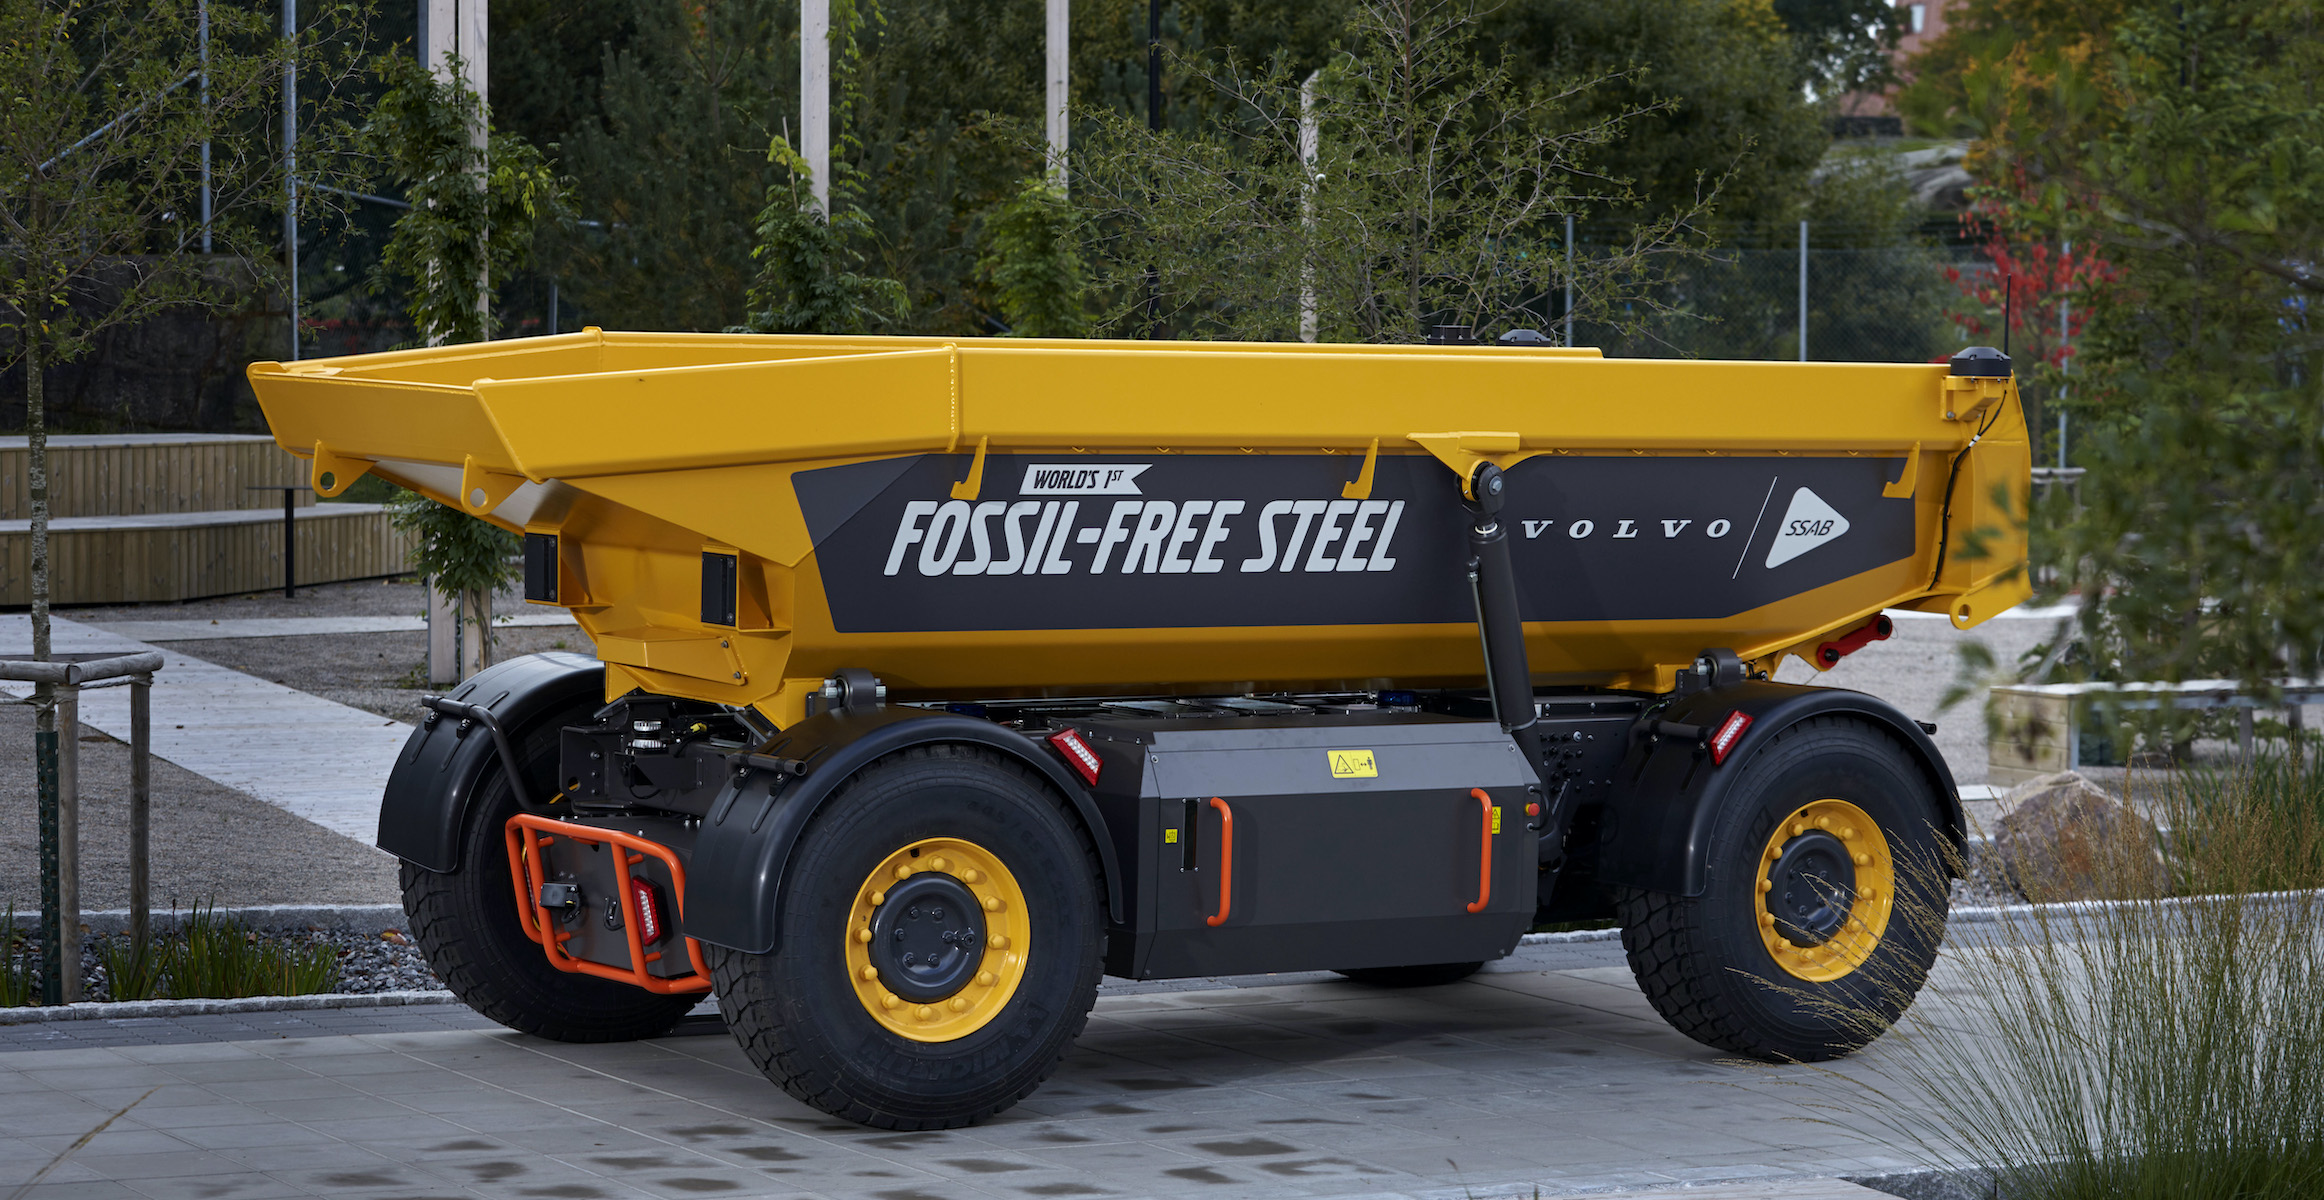 The autonomous load carrier is designed for mining and quarrying